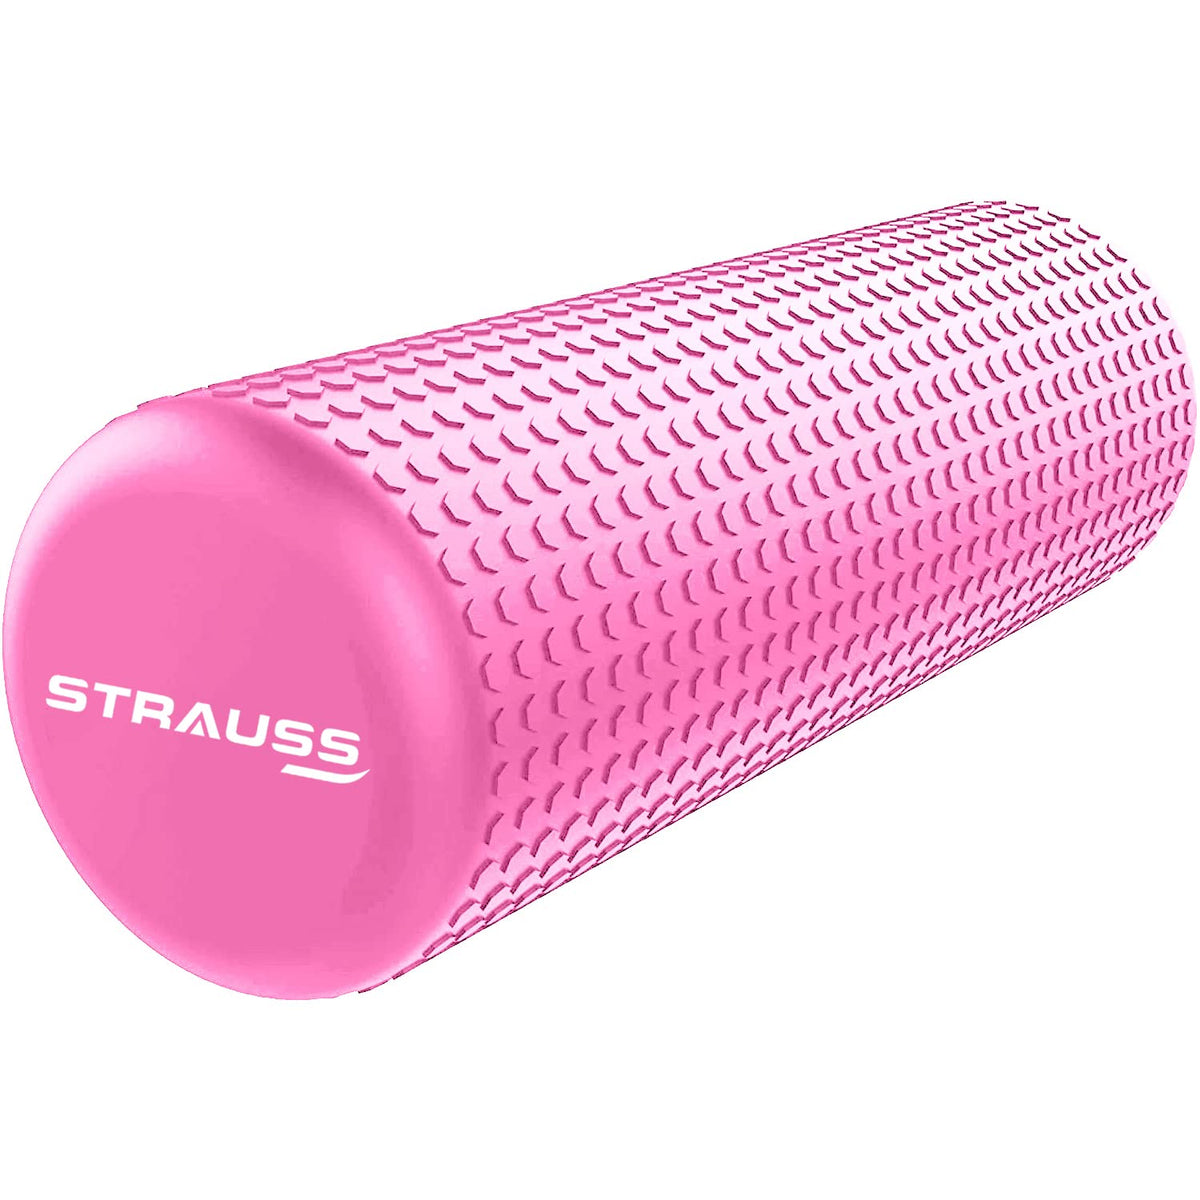  Gaiam Restore 05-58272 18-Inch Muscle Therapy Foam Roller w/  DVD : Exercise Foam Rollers : Sports & Outdoors